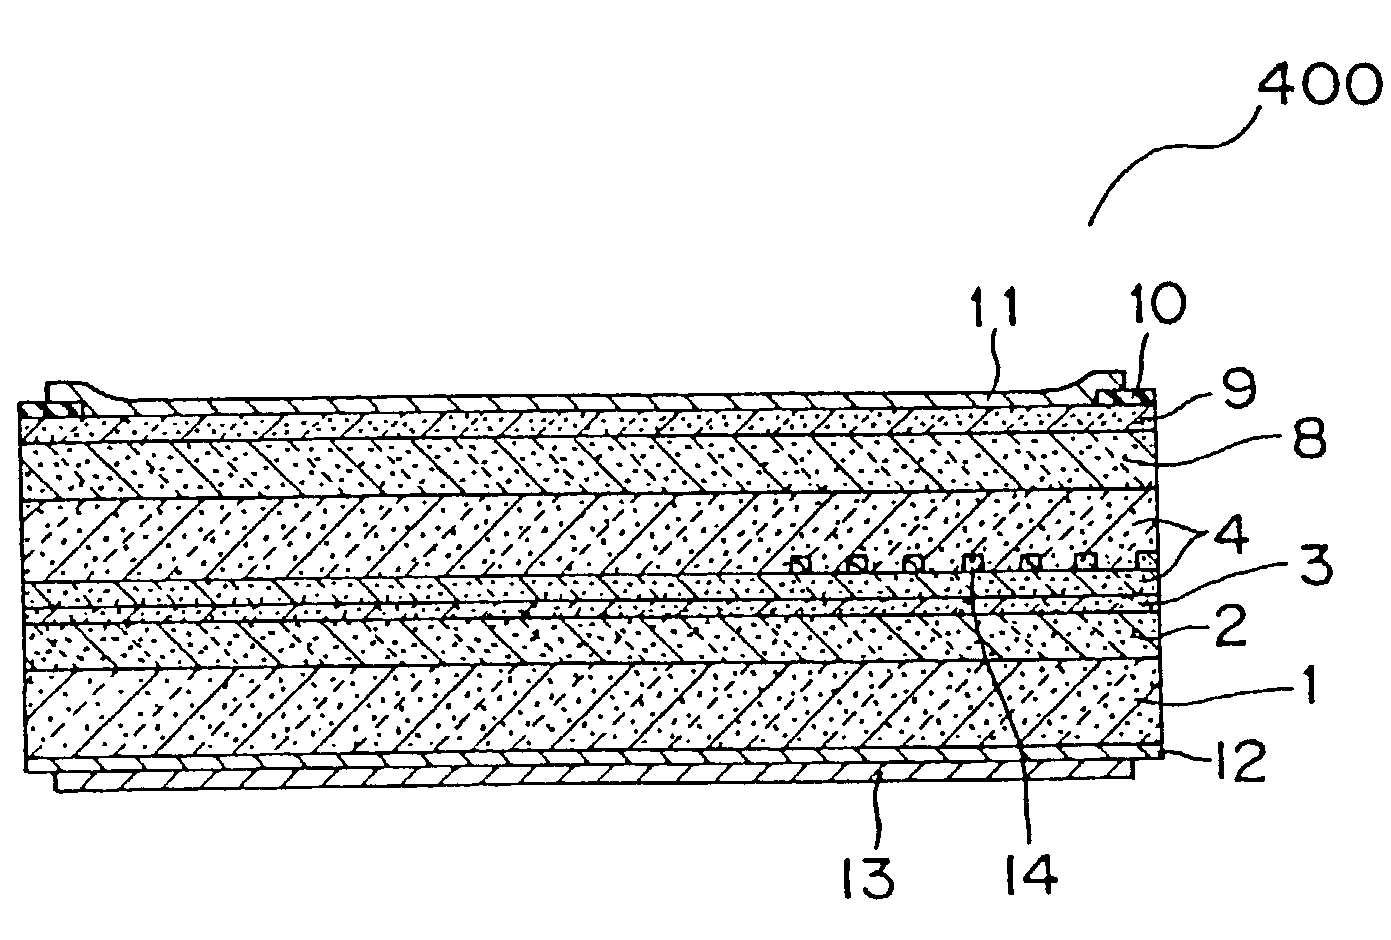 Semiconductor optical device